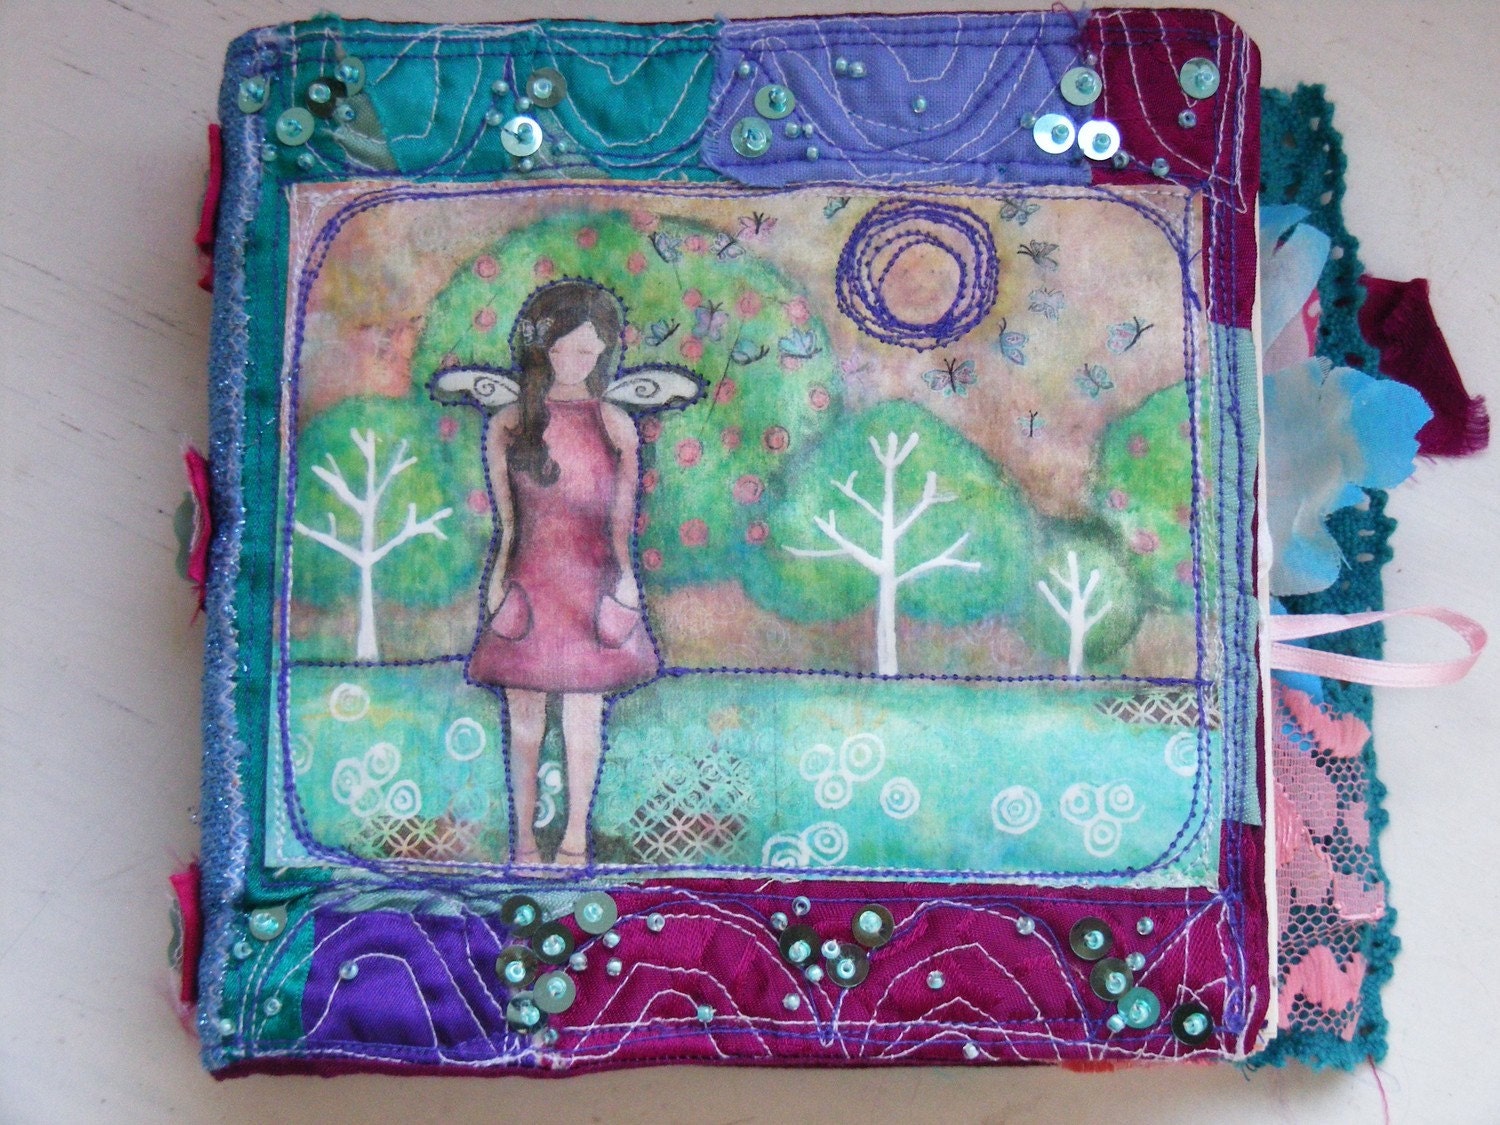 Unique Fabric Journal with mixed media print